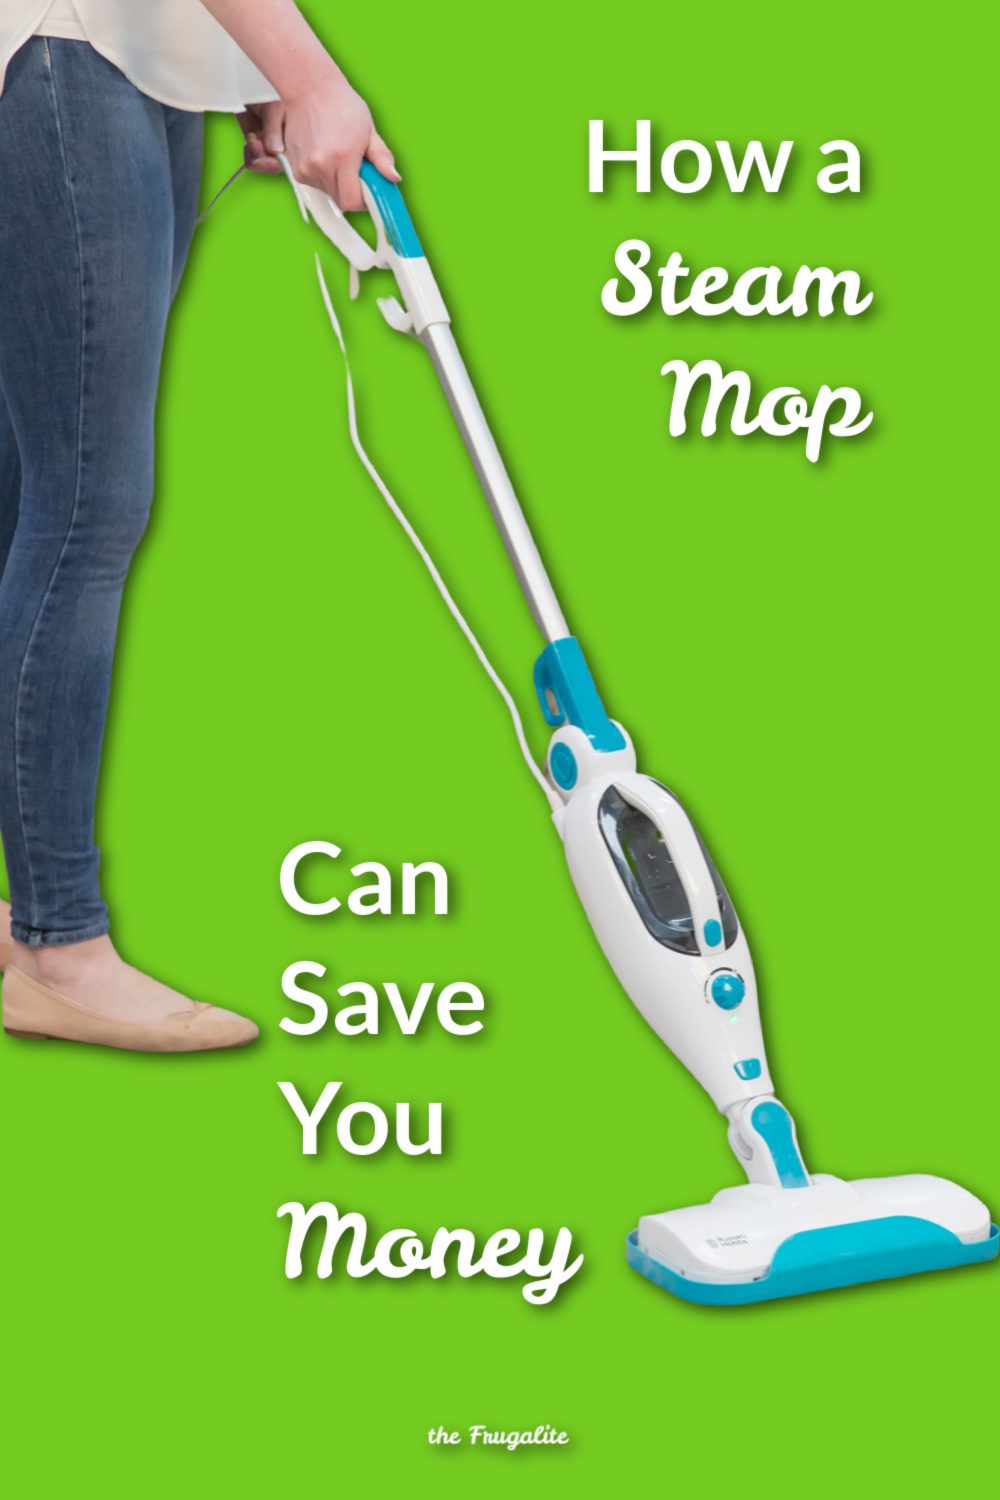 How a Steam Mop Can Save You Money